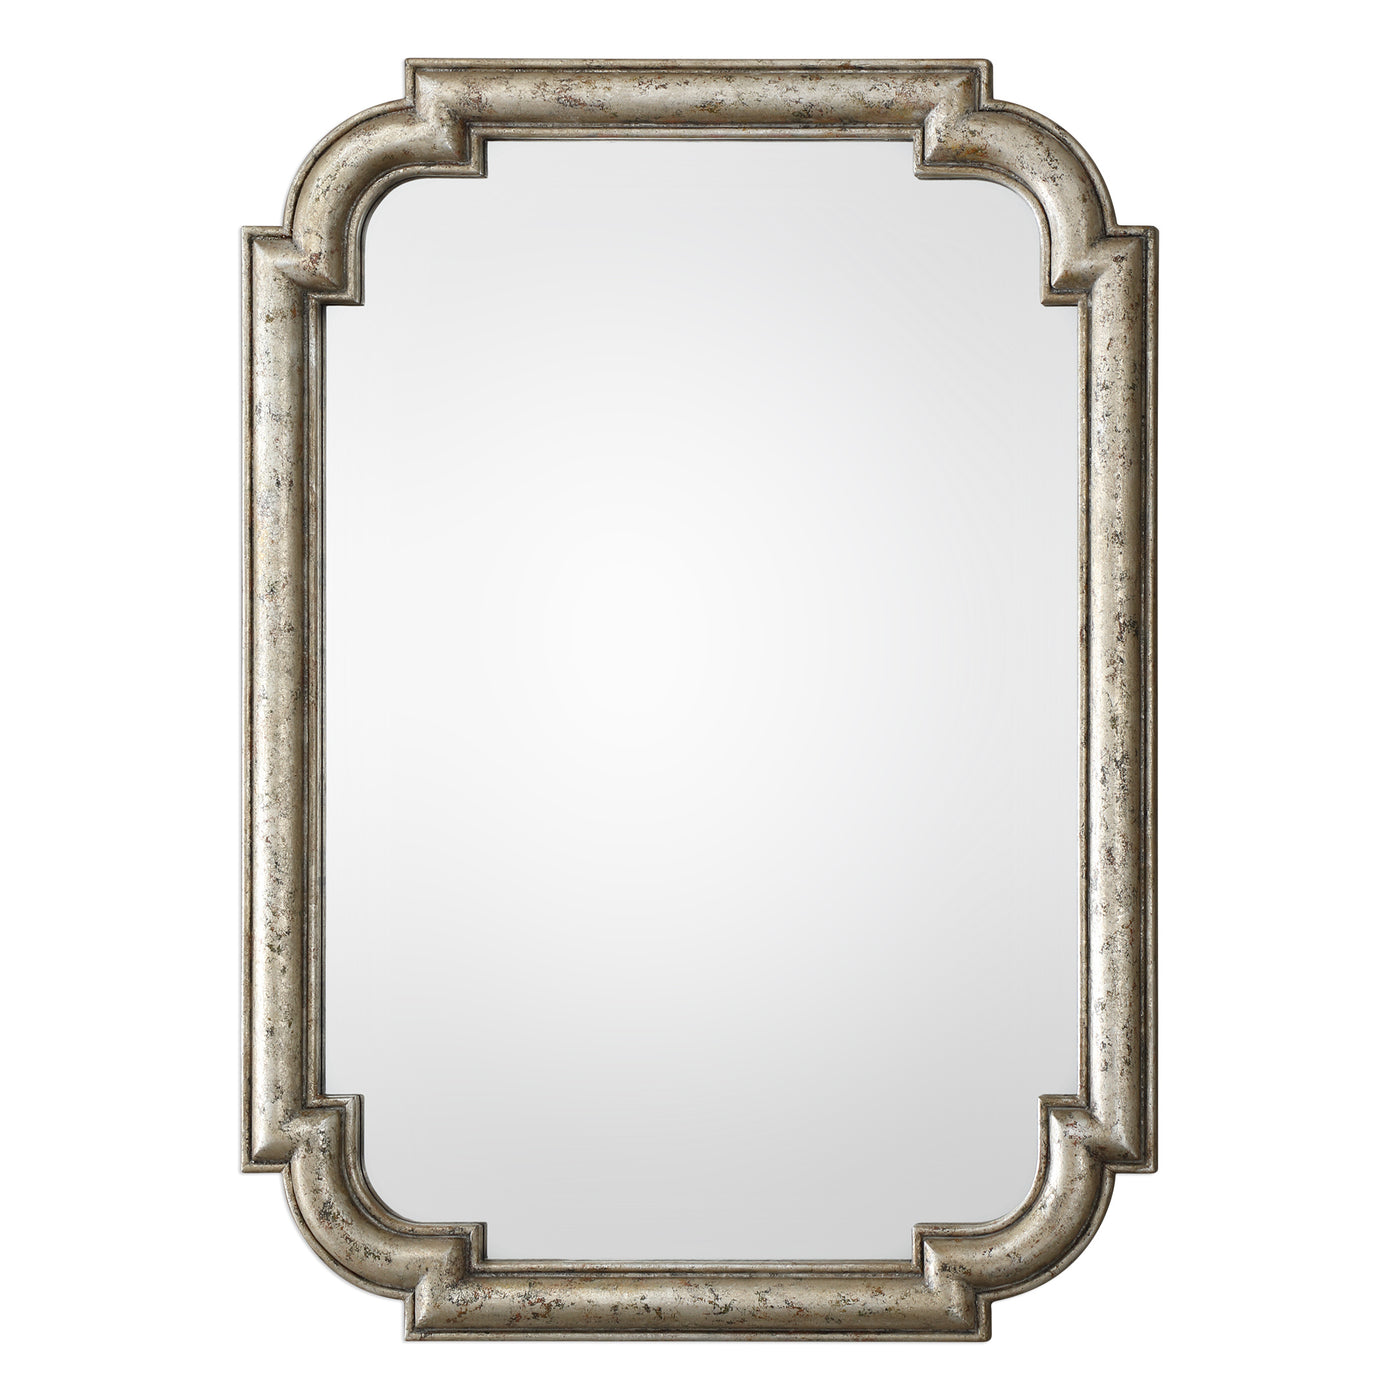 This Solid Wood Frame Features An Updated Look To A Traditional Design, Hand Finished In A Lightly Antiqued, Distressed Si...